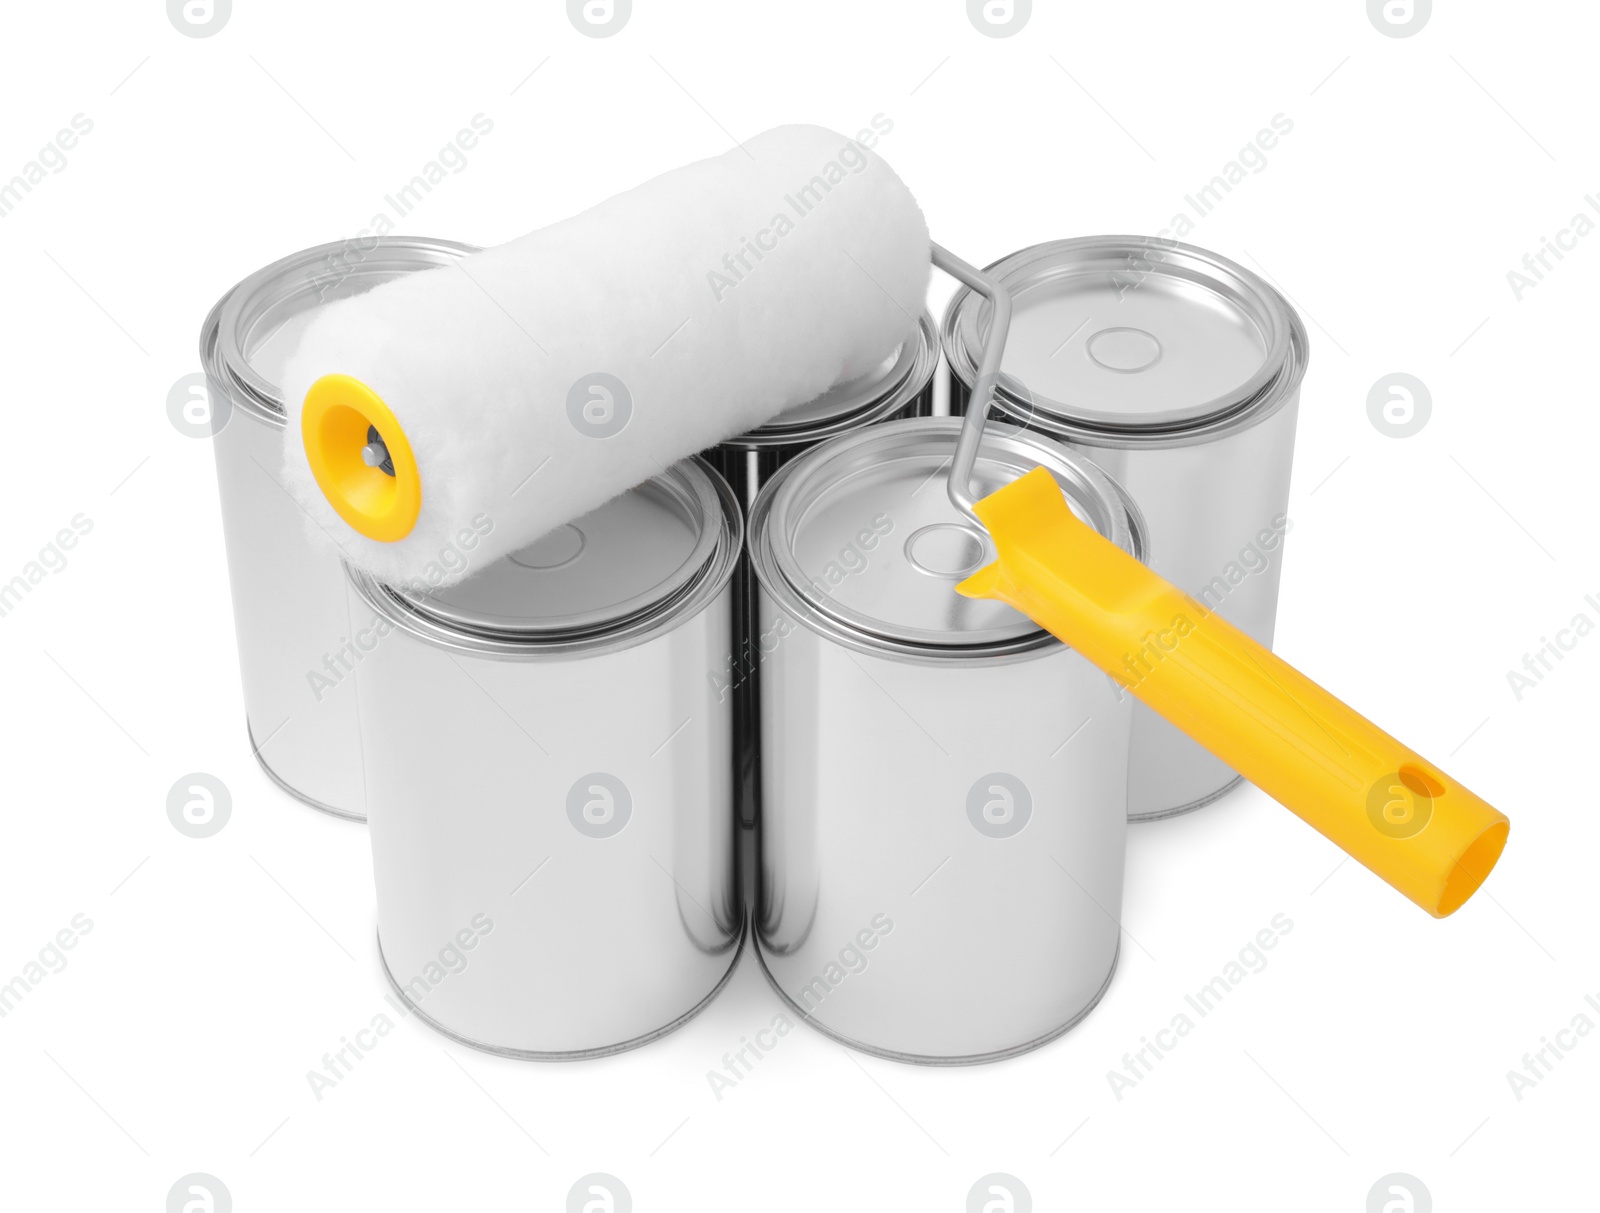 Photo of Cans of paints and roller on white background